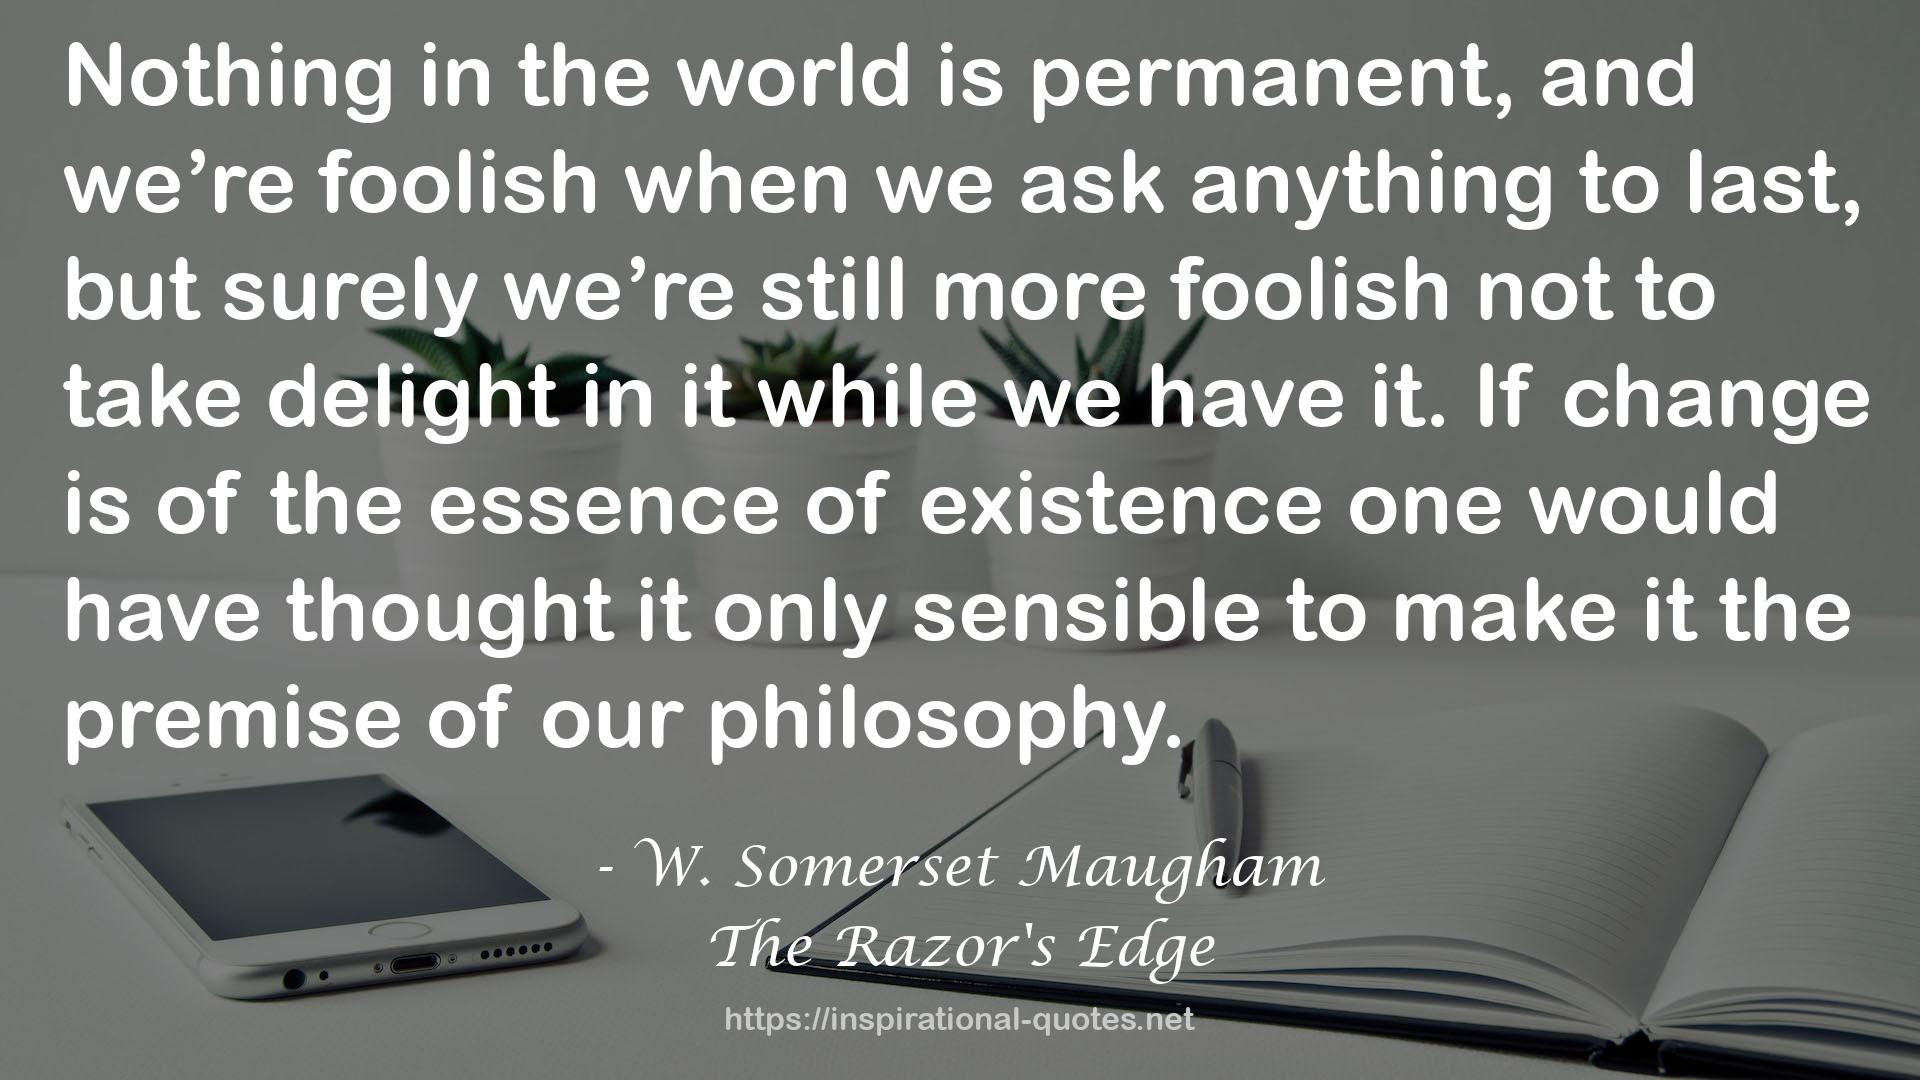 W. Somerset Maugham QUOTES